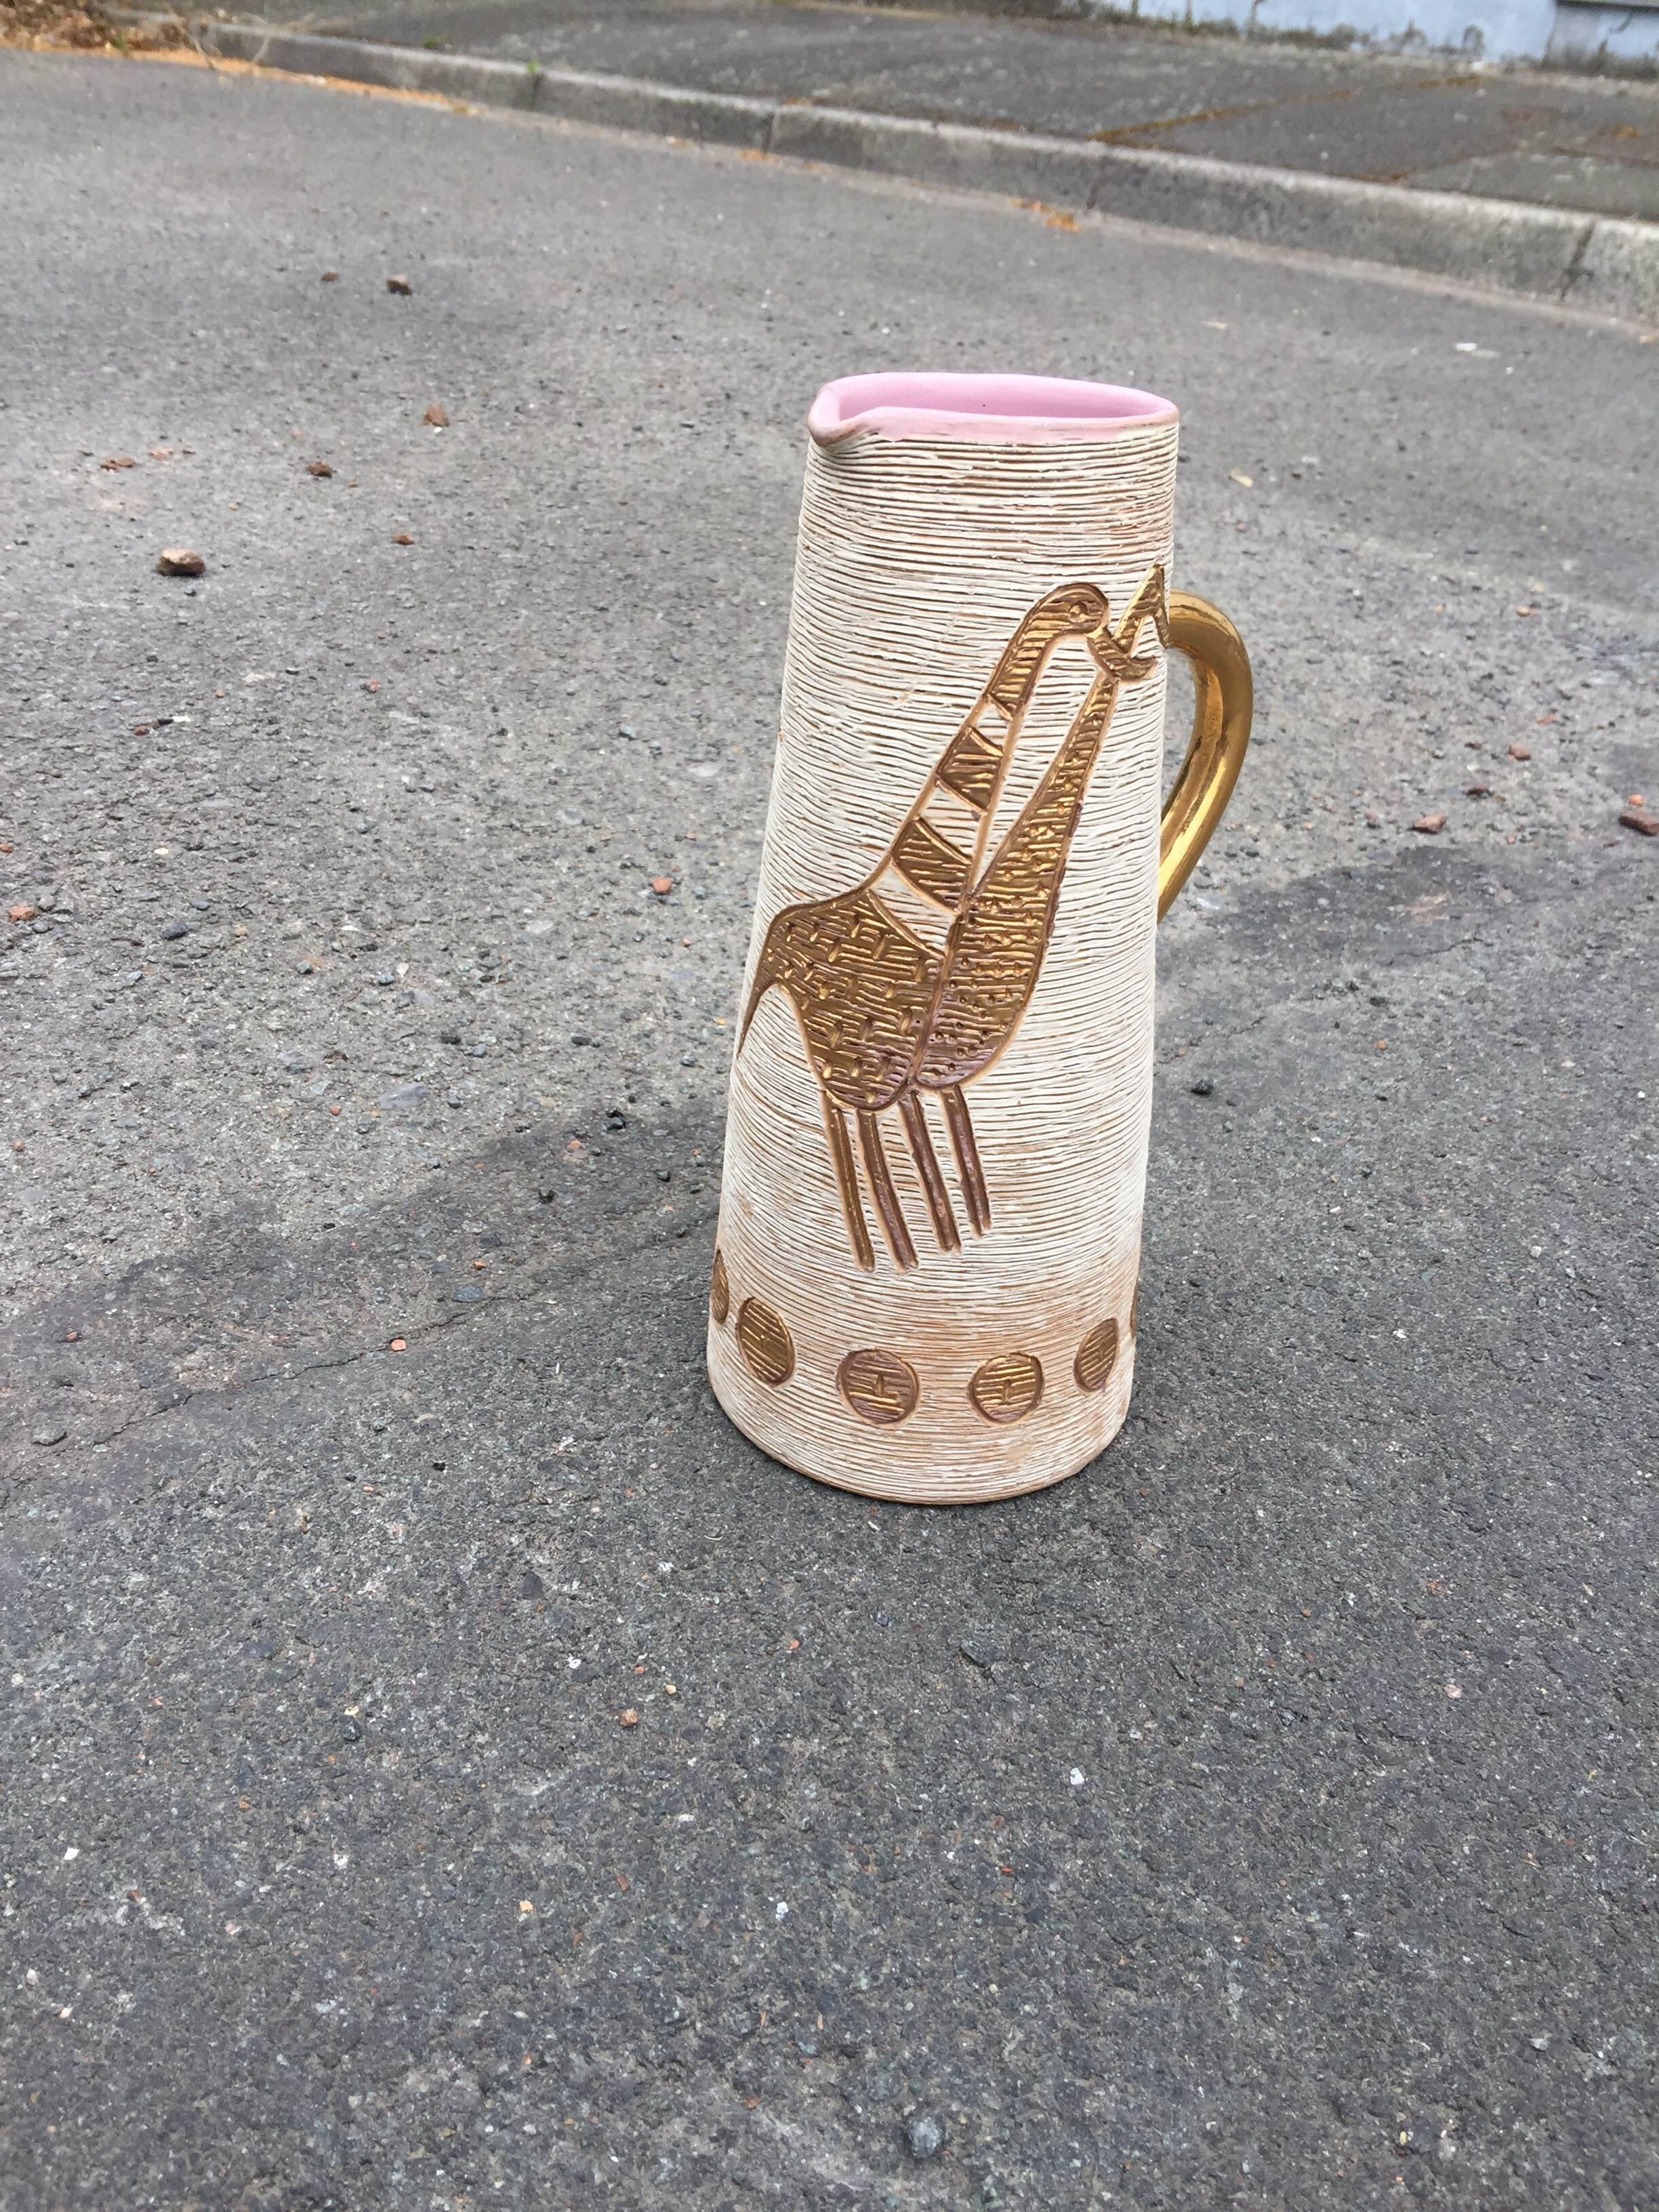 Ceramic Pitcher with Bird Design, Made in Italy, circa 1960 For Sale 1